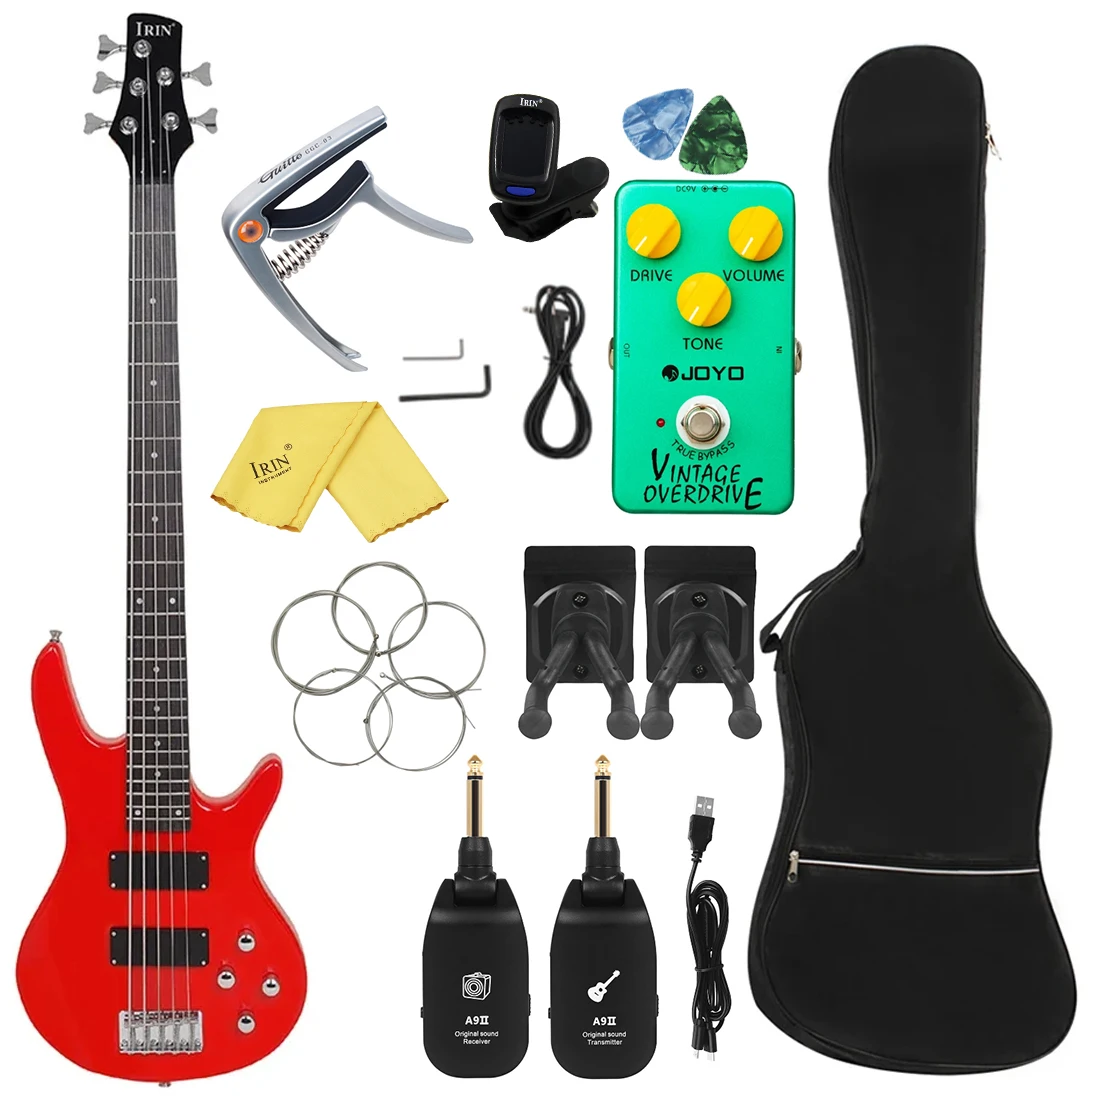 

IRIN 5 Strings Electric Bass Red 24 Frets Maple Body Neck Bass Guitar Stringed Instrument Guitarra with Tuner Strings Capo Parts